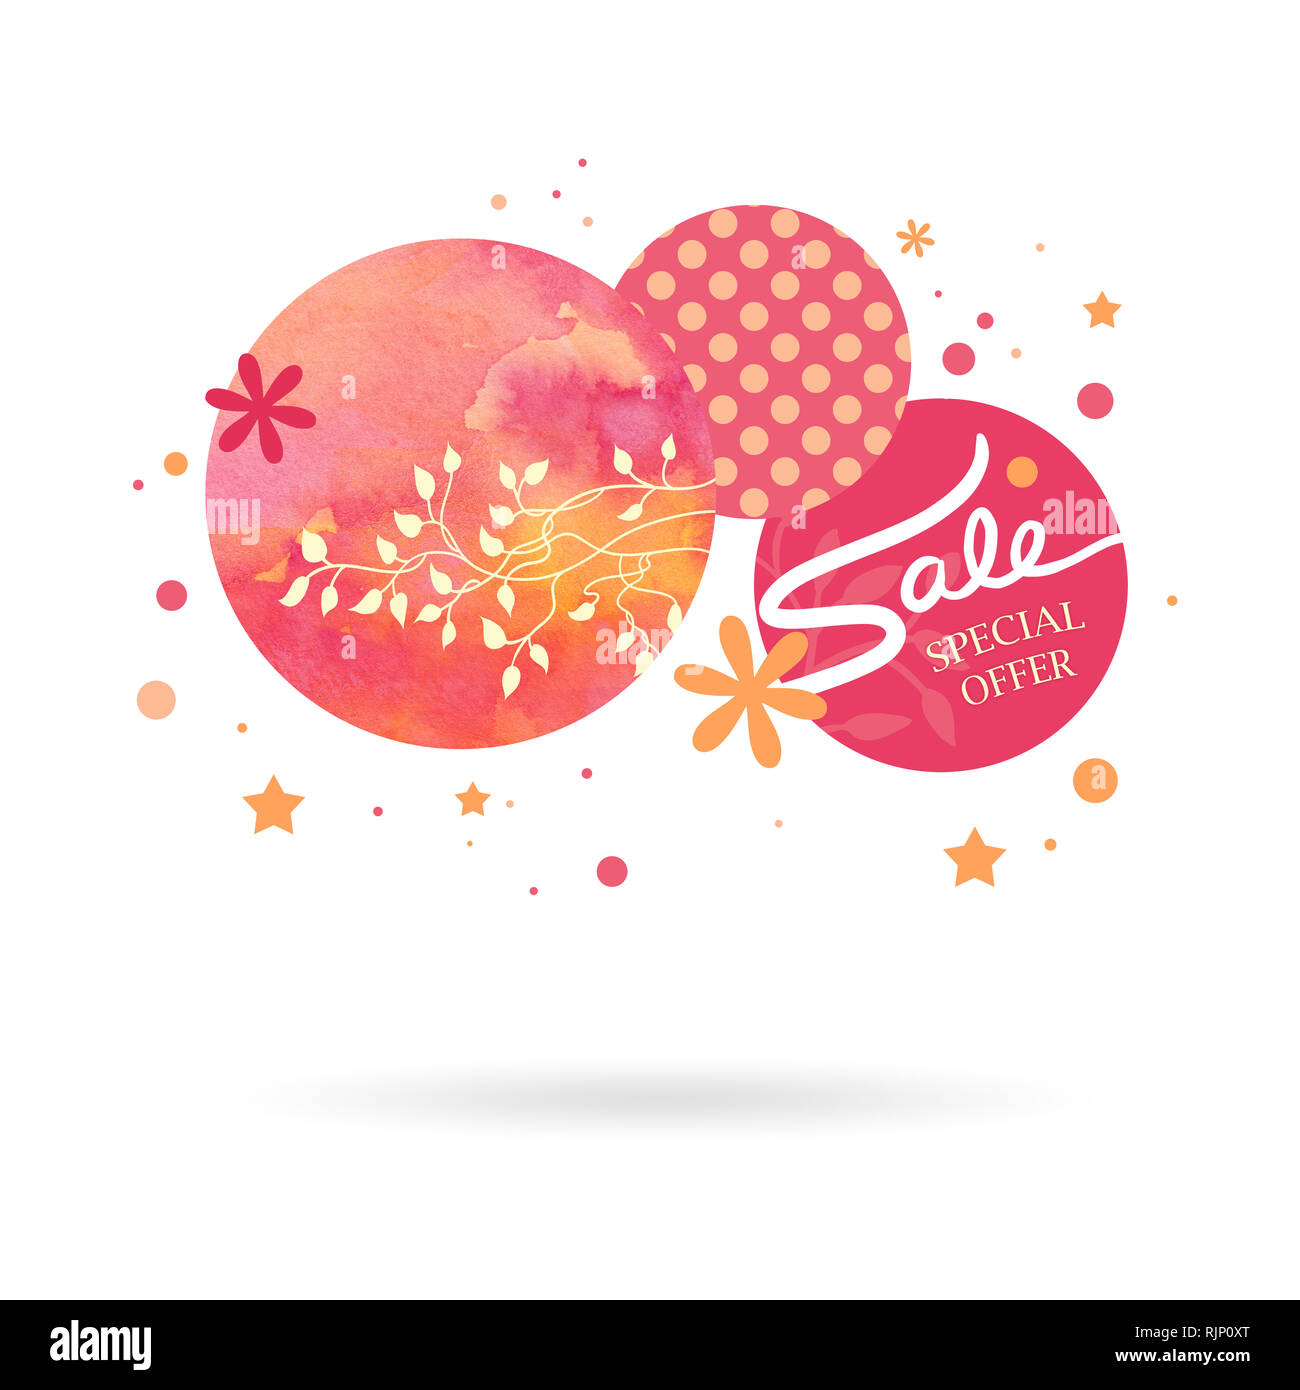 Abstract modern graphic design elements. Circle and star shapes with polka dot spots and watercolor painted background texture are layered in a pink a Stock Photo